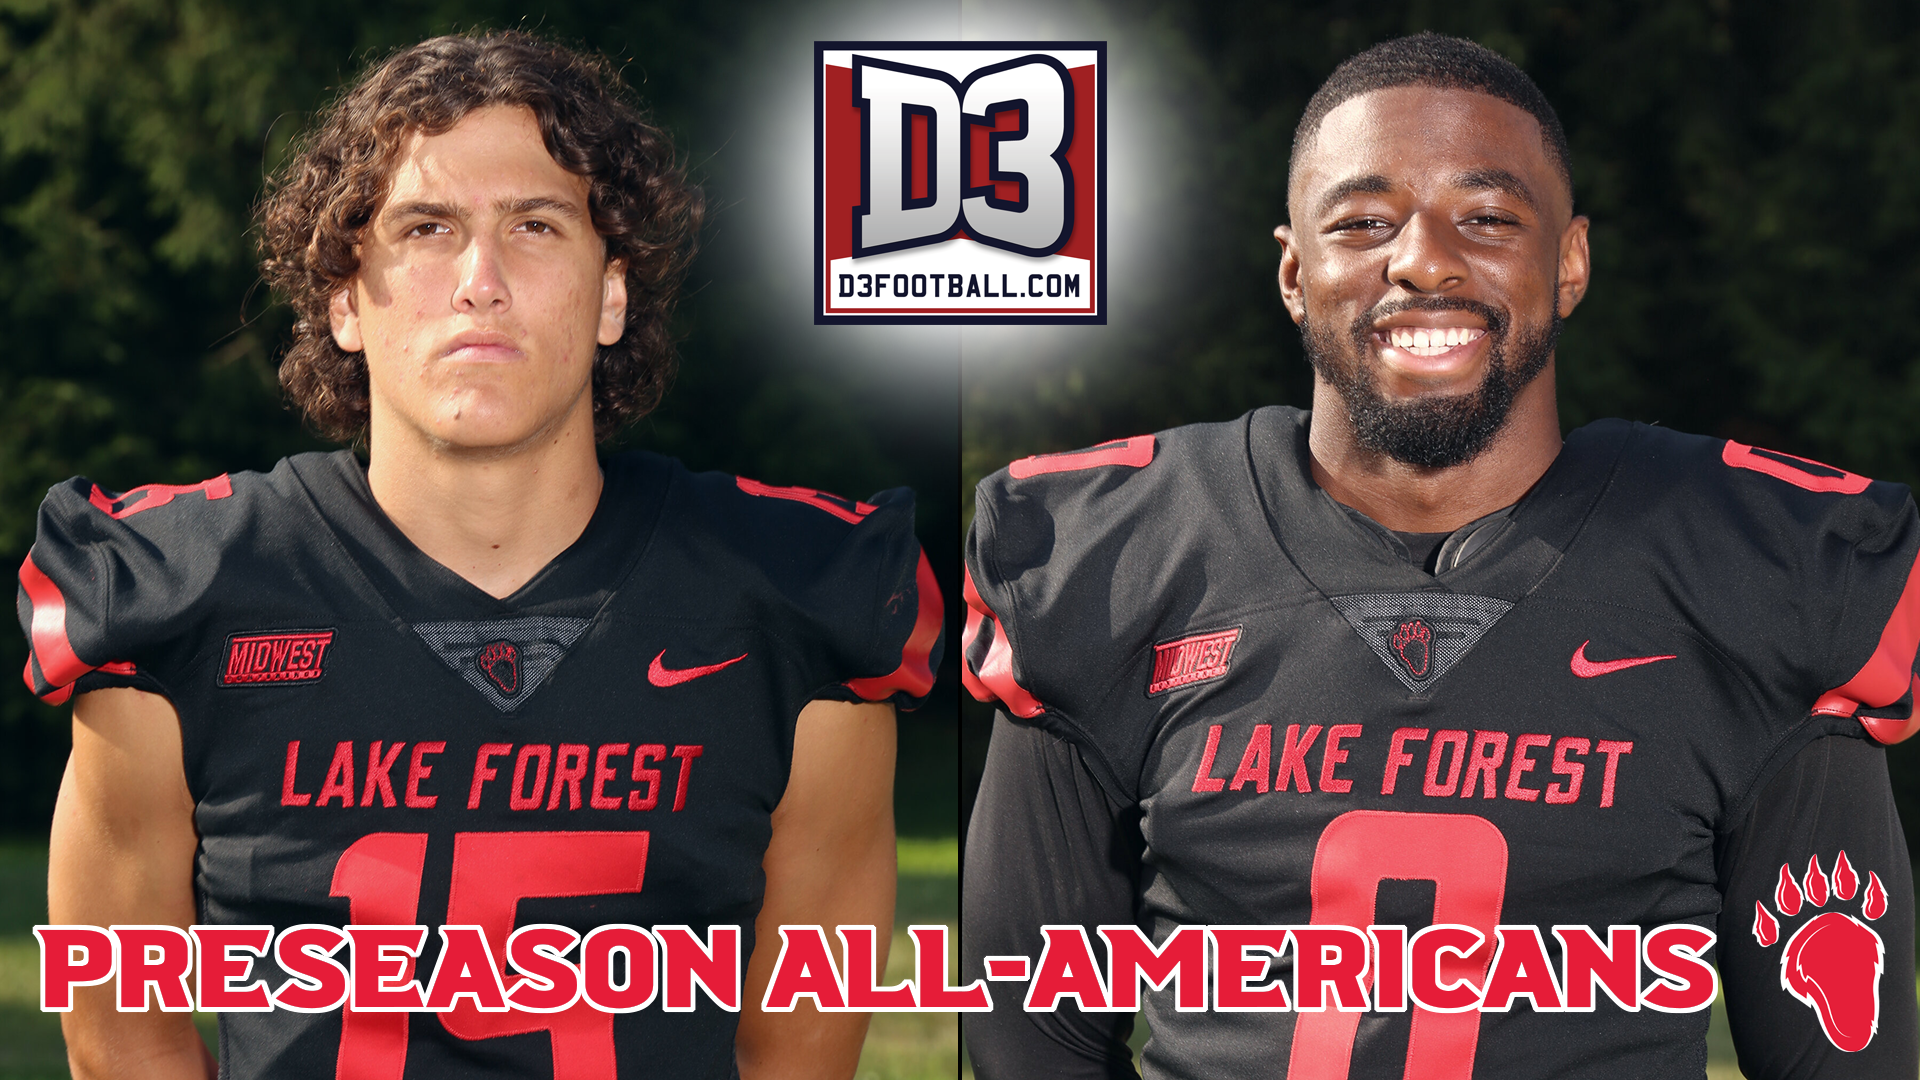 Esposito and Jackson Named First Team Preseason All-Americans by D3football.com